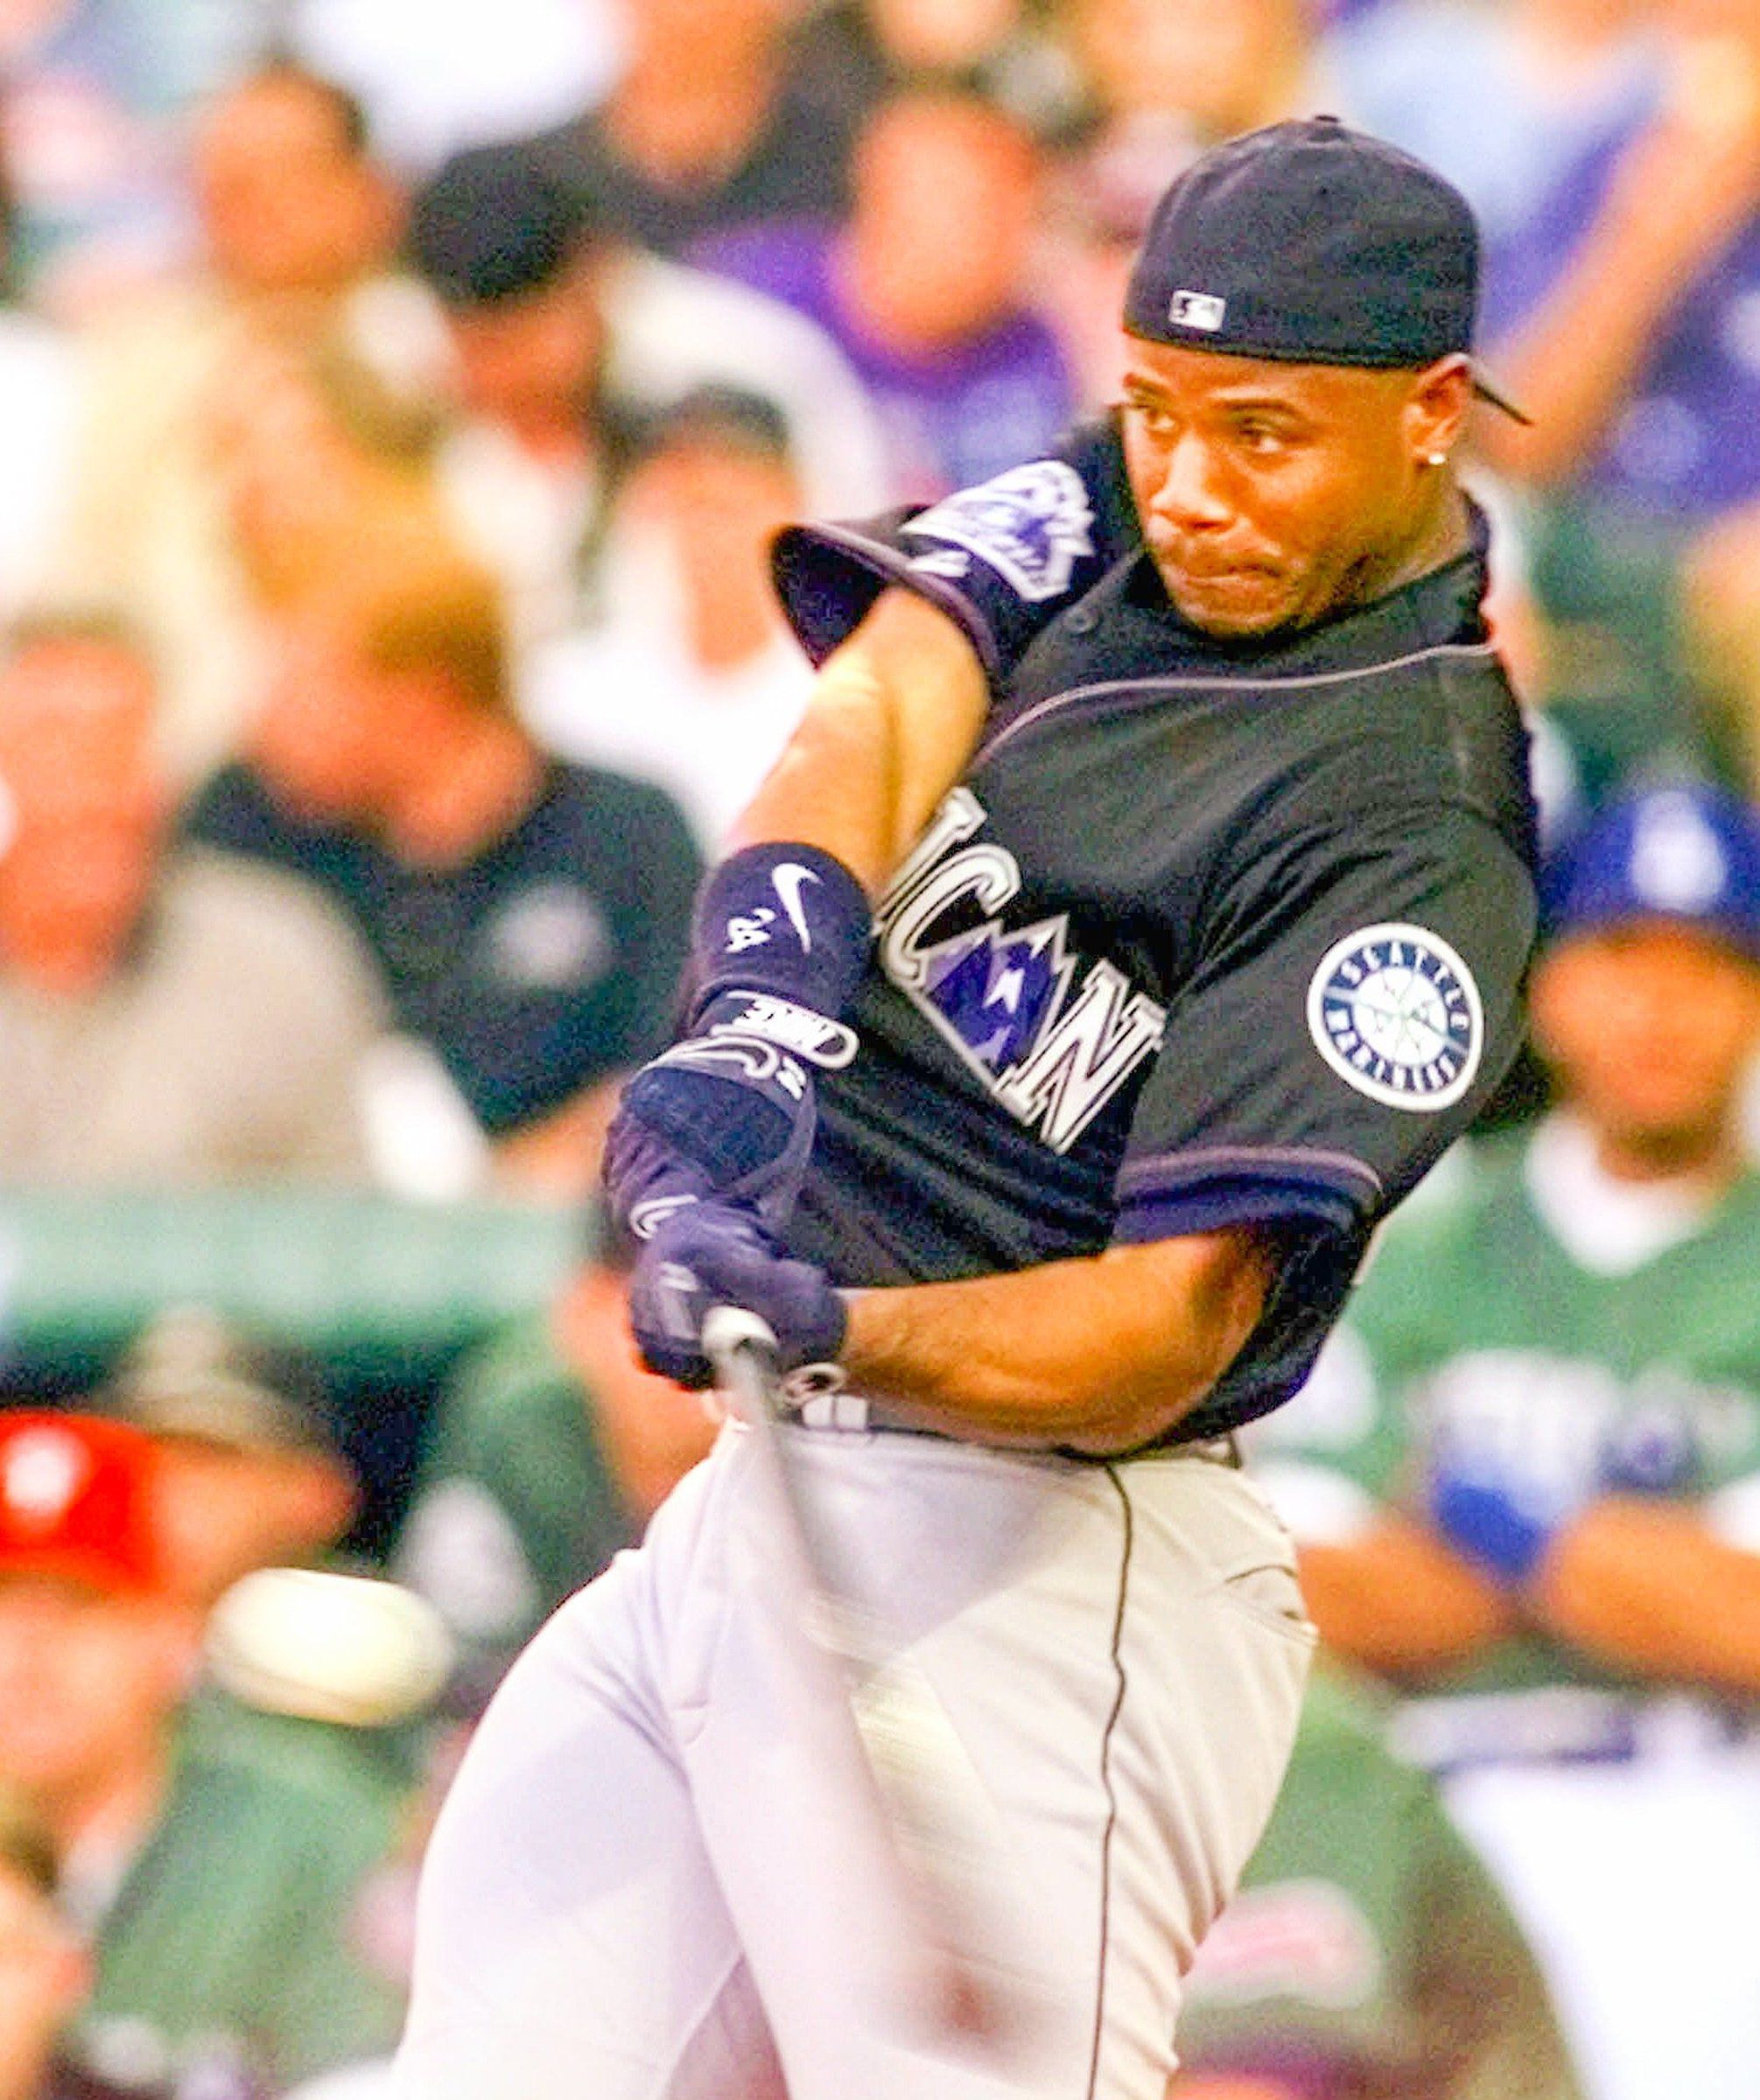 The Home Run Derby is back in Denver, where Mariners star Ken Griffey Jr